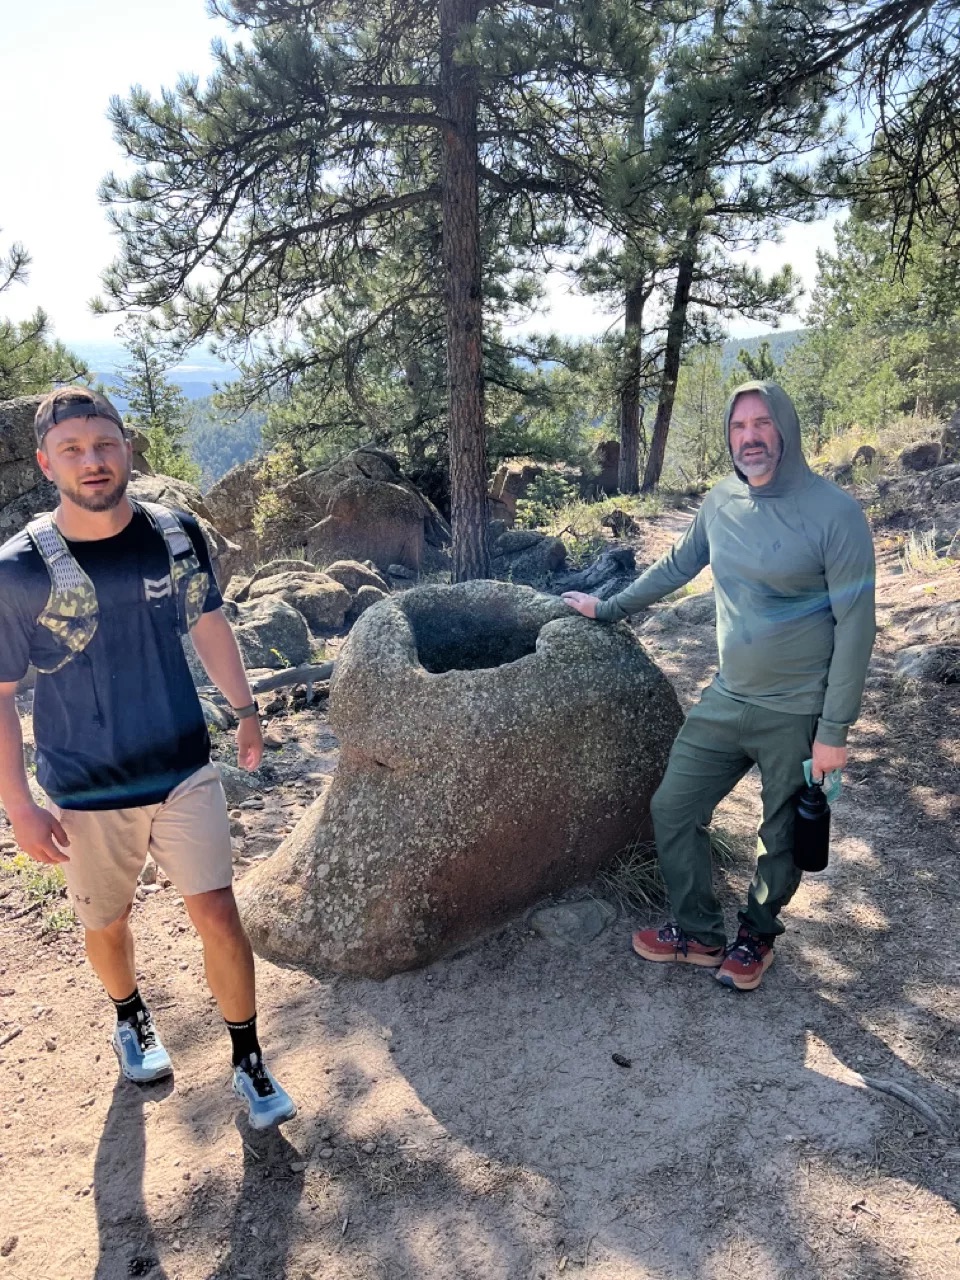 Co-founder David hiking with Bill from BillieBars
